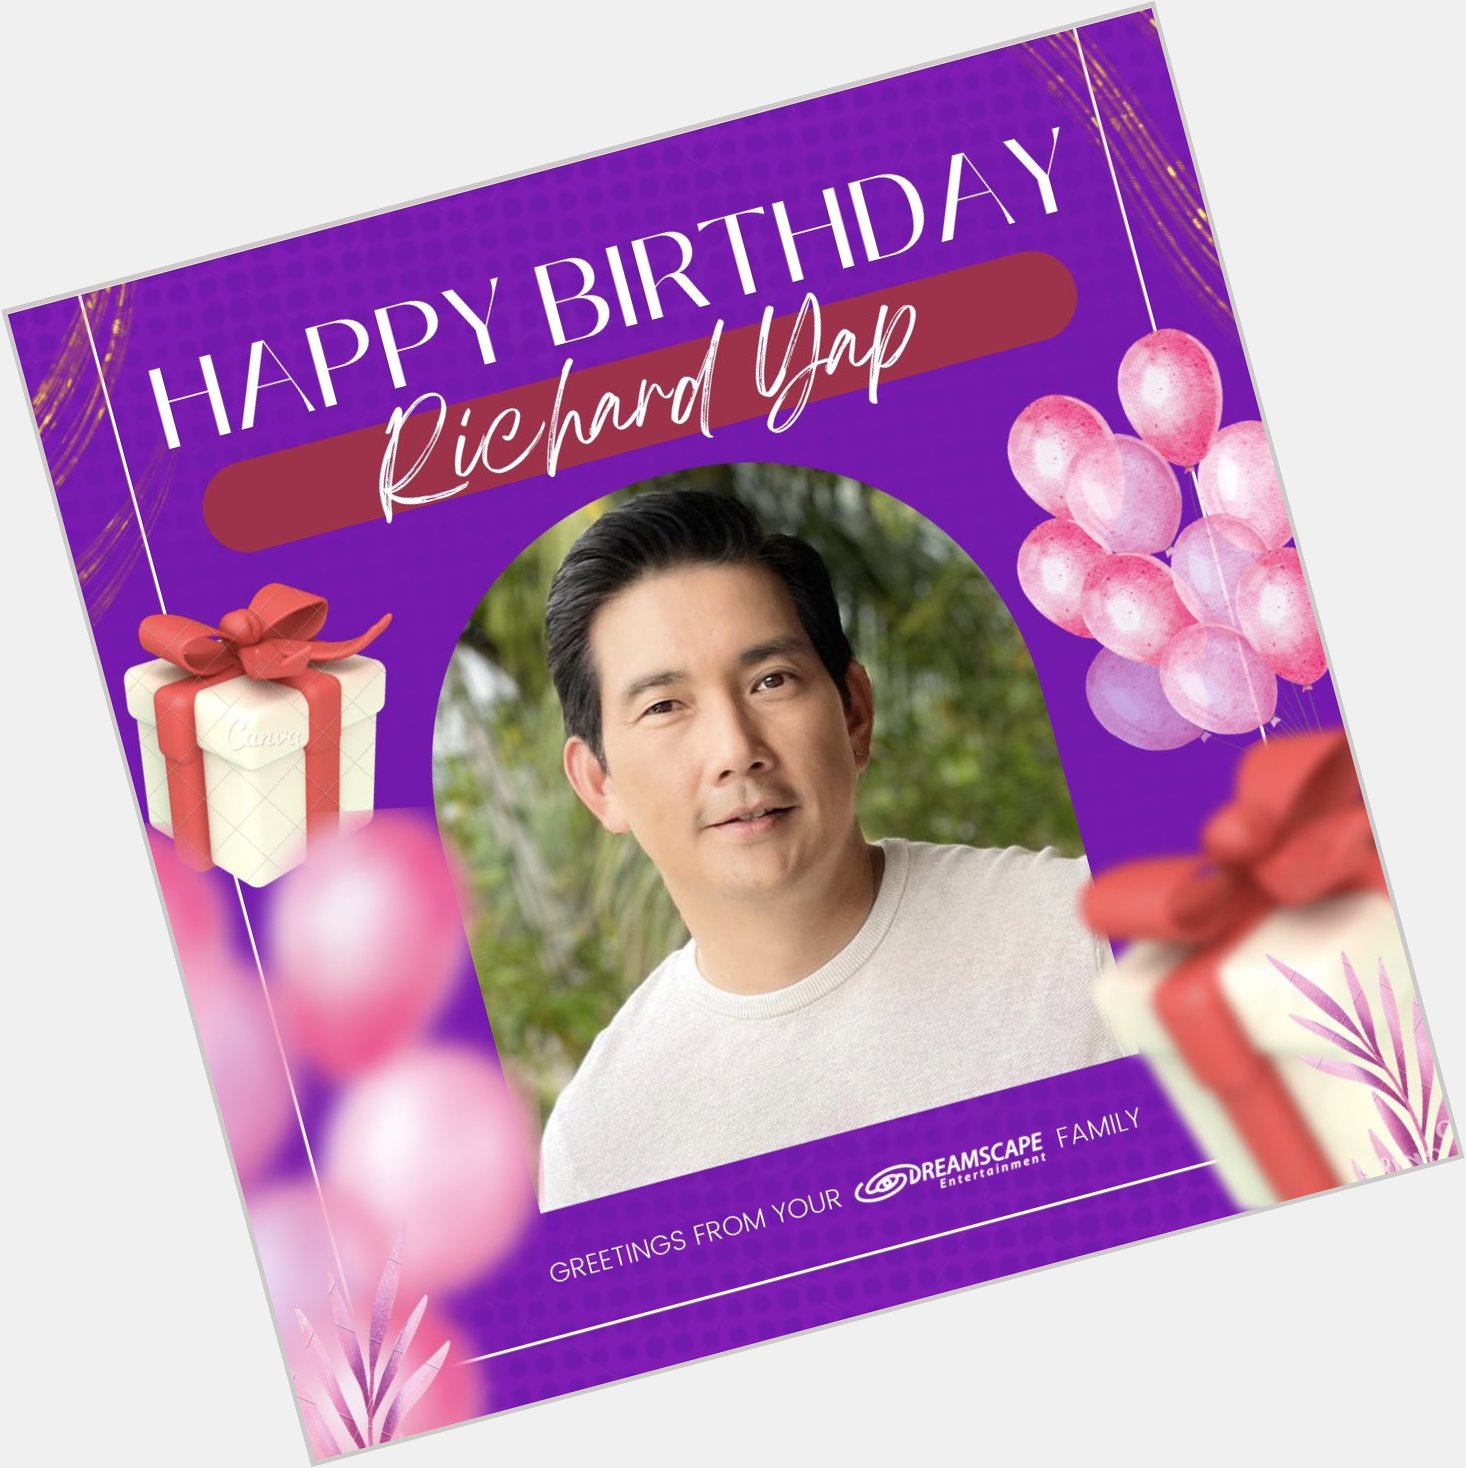 Happy Birthday Richard Yap!  Greetings from your Dreamscape family 